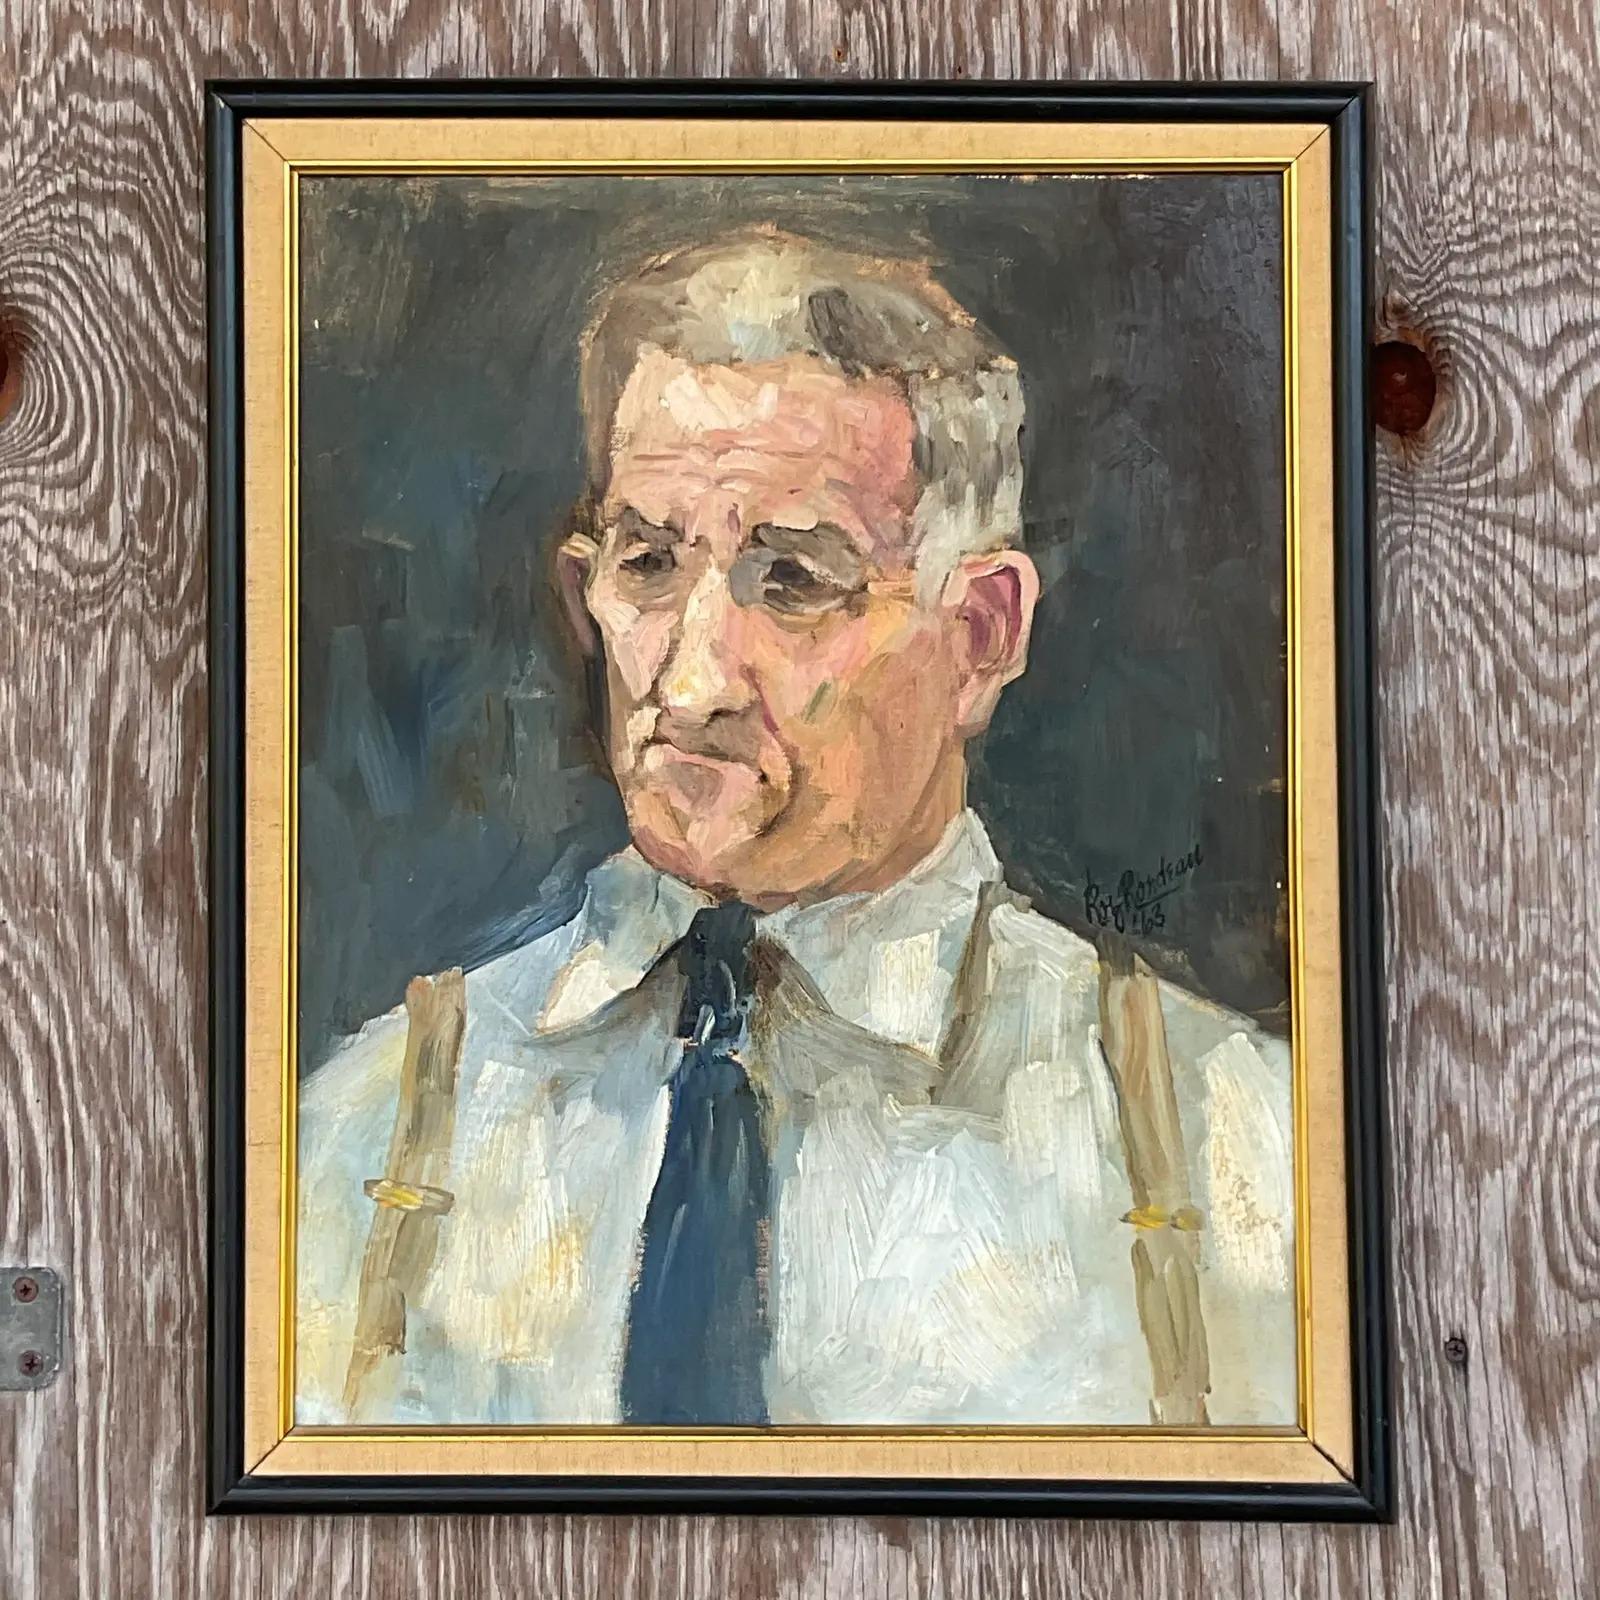 Fantastic vintage MCM original oil portrait. An intriguing composition of a distinguished gentleman. Beautiful painterly texture. Signed and dated 1963. Acquired from a Palm Beach estate.